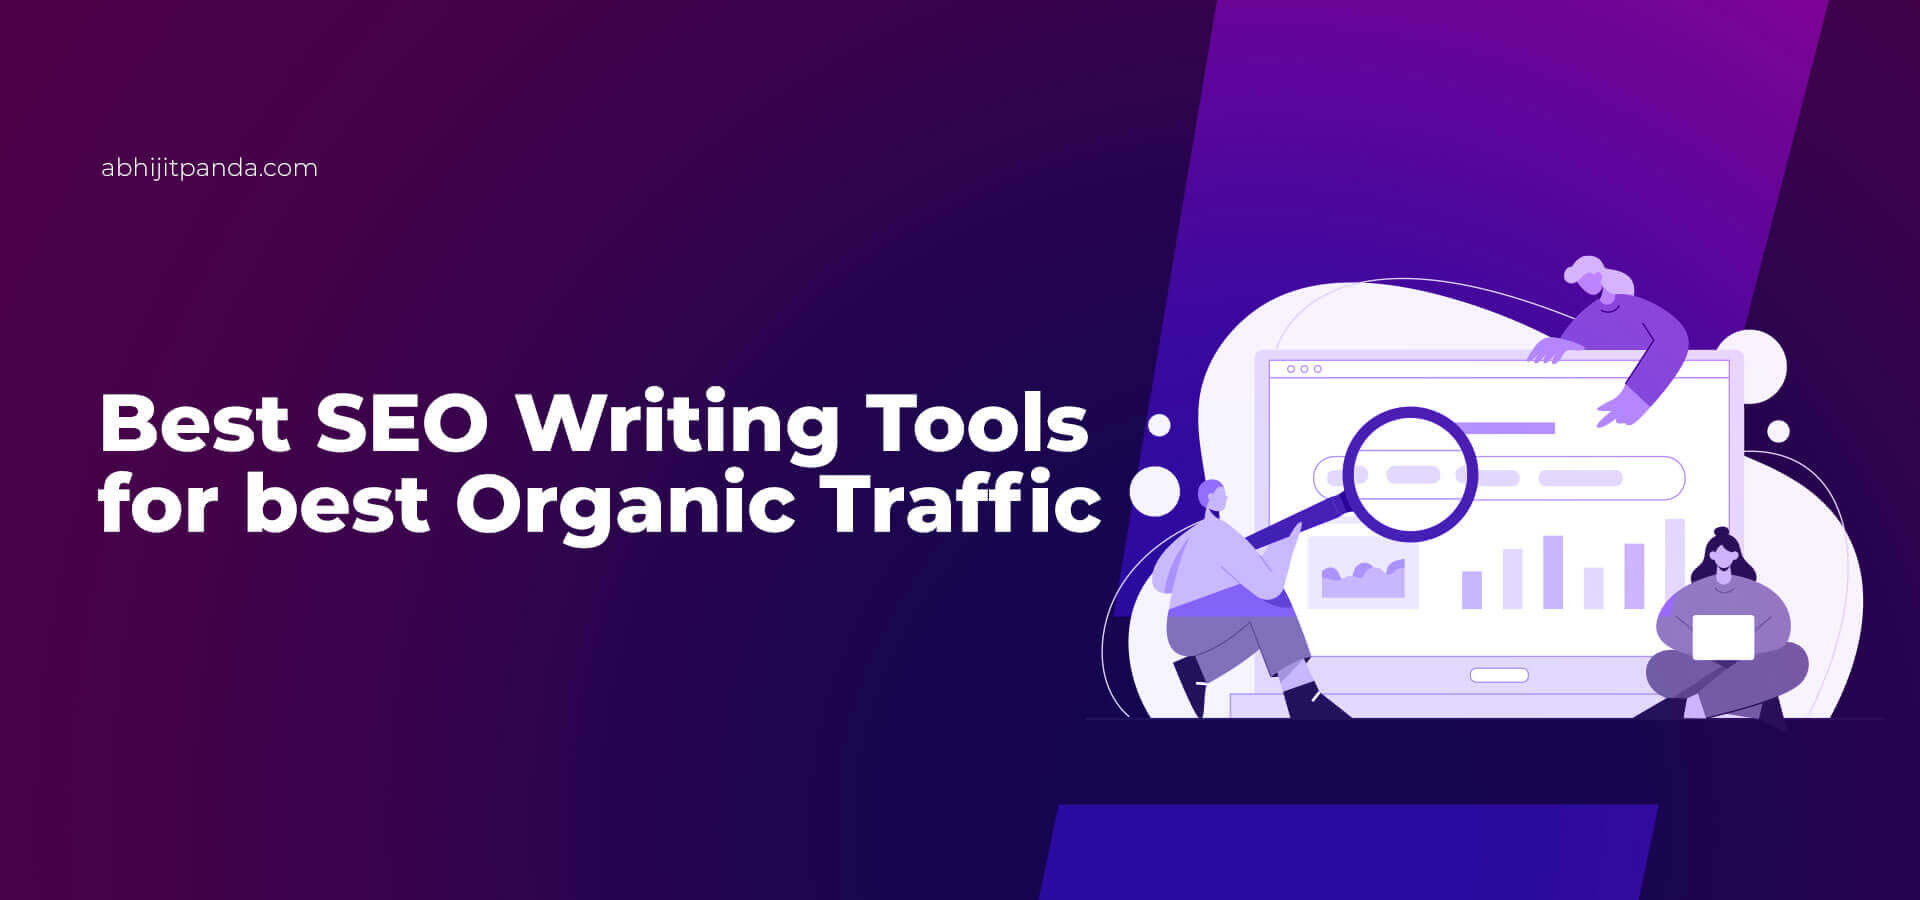 Best SEO Writing Tools for better Organic Ranking